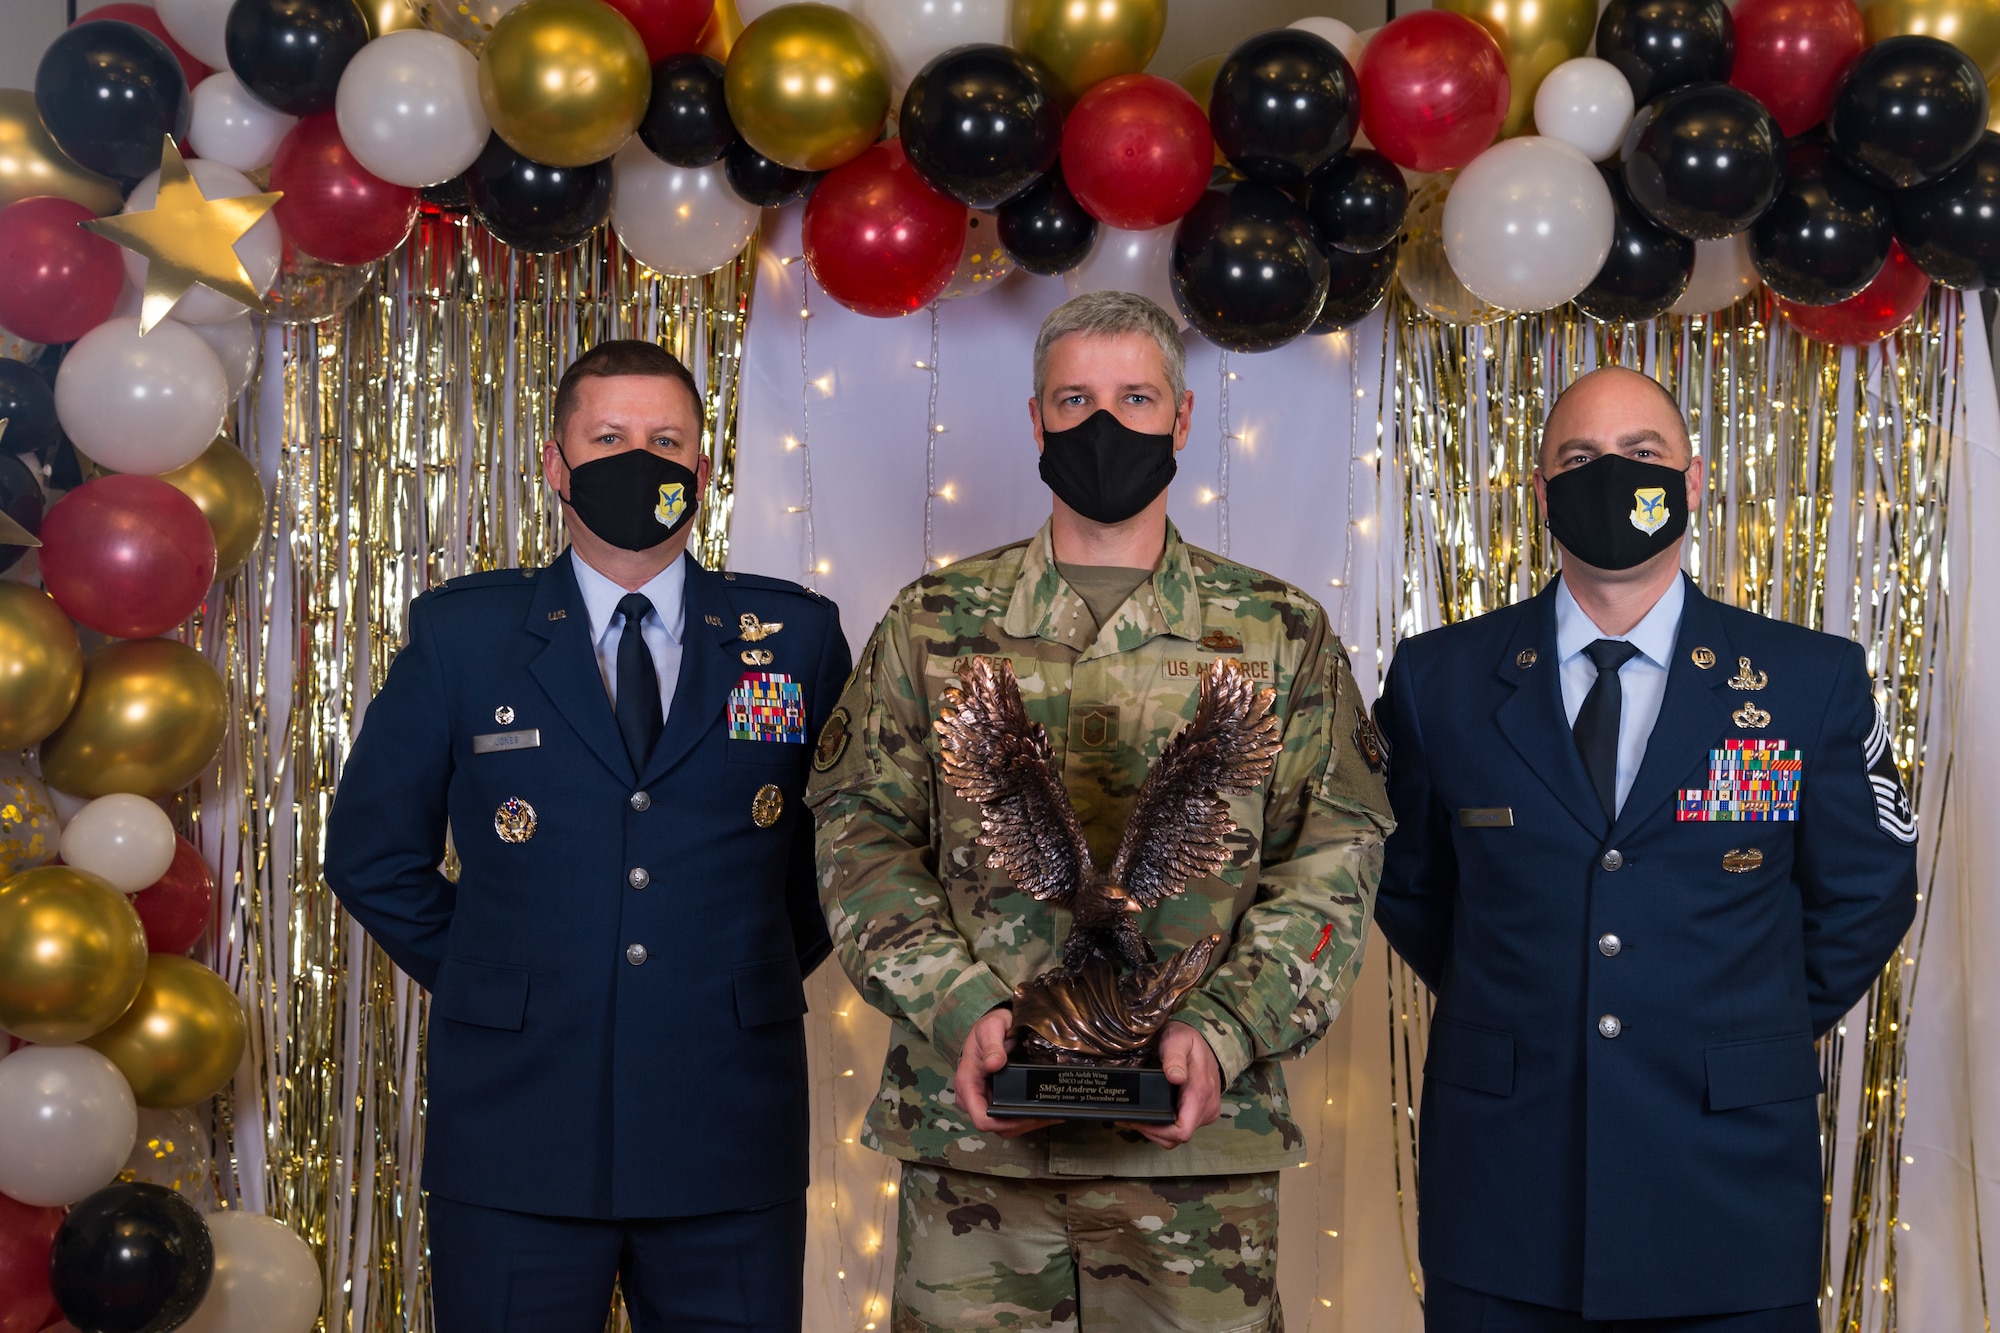 Senior Master Sgt. Andrew Casper, 436th Aircraft Maintenance Squadron, poses for a photo with Col. Matthew Jones, 436th Airlift Wing commander, and Chief Master Sgt. Jeremiah Grisham, 436th AW interim command chief, following the conclusion of the 436th AW 2020 Annual Awards Ceremony at Dover Air Force Base, Delaware, Jan. 28, 2021. Casper was named the wing's senior noncommissioned officer of the year and received an eagle trophy. (U.S. Air Force photo by Roland Balik)